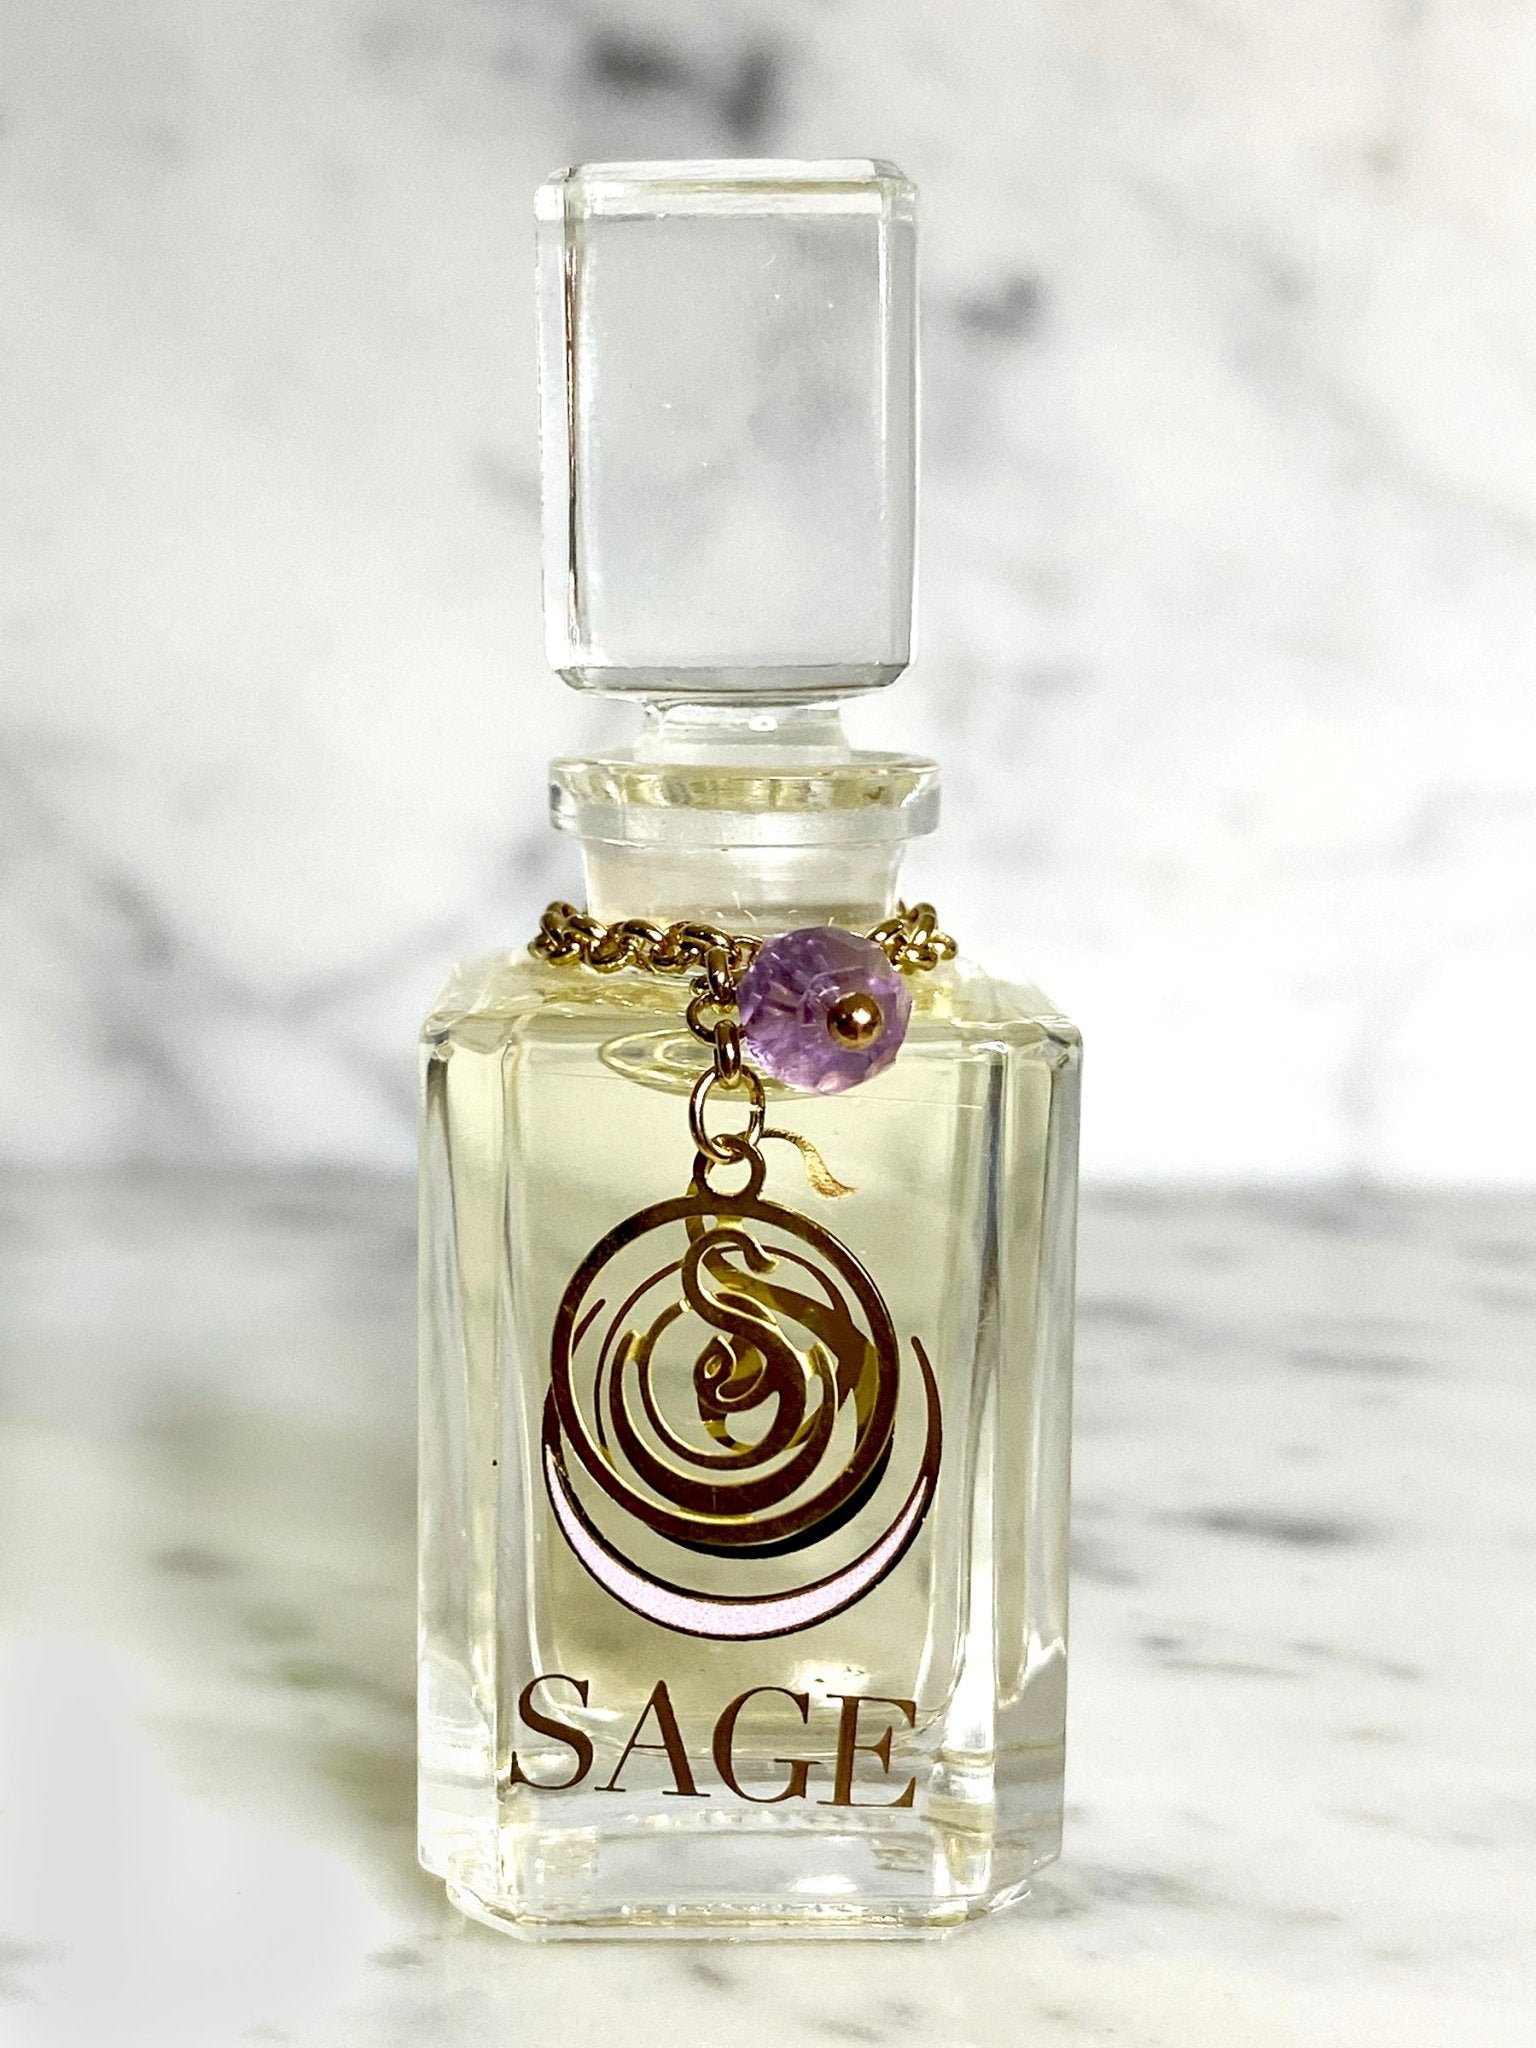 Amethyst Vanity Bottle by Sage, Pure Perfume Oil - The Sage Lifestyle